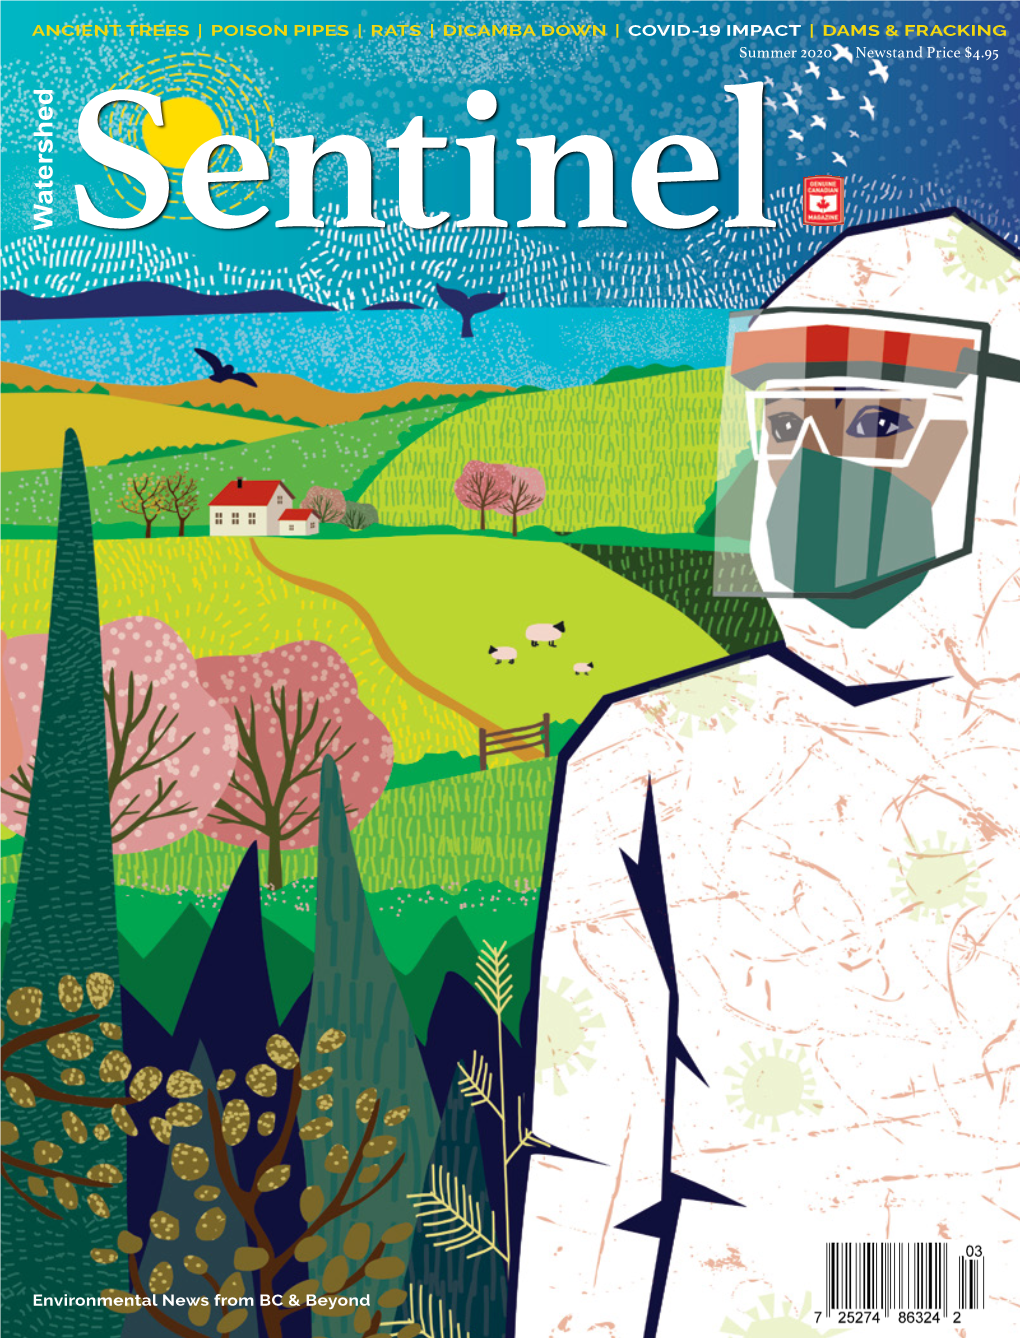 Summer 2020 Issue of the Watershed Sentinel